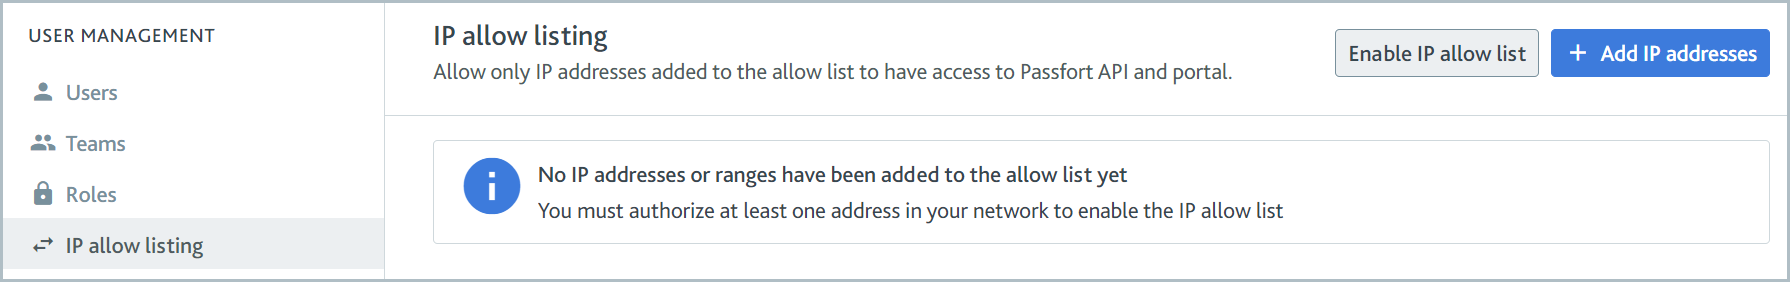 IP allow listing tab with no IP addresses listed.